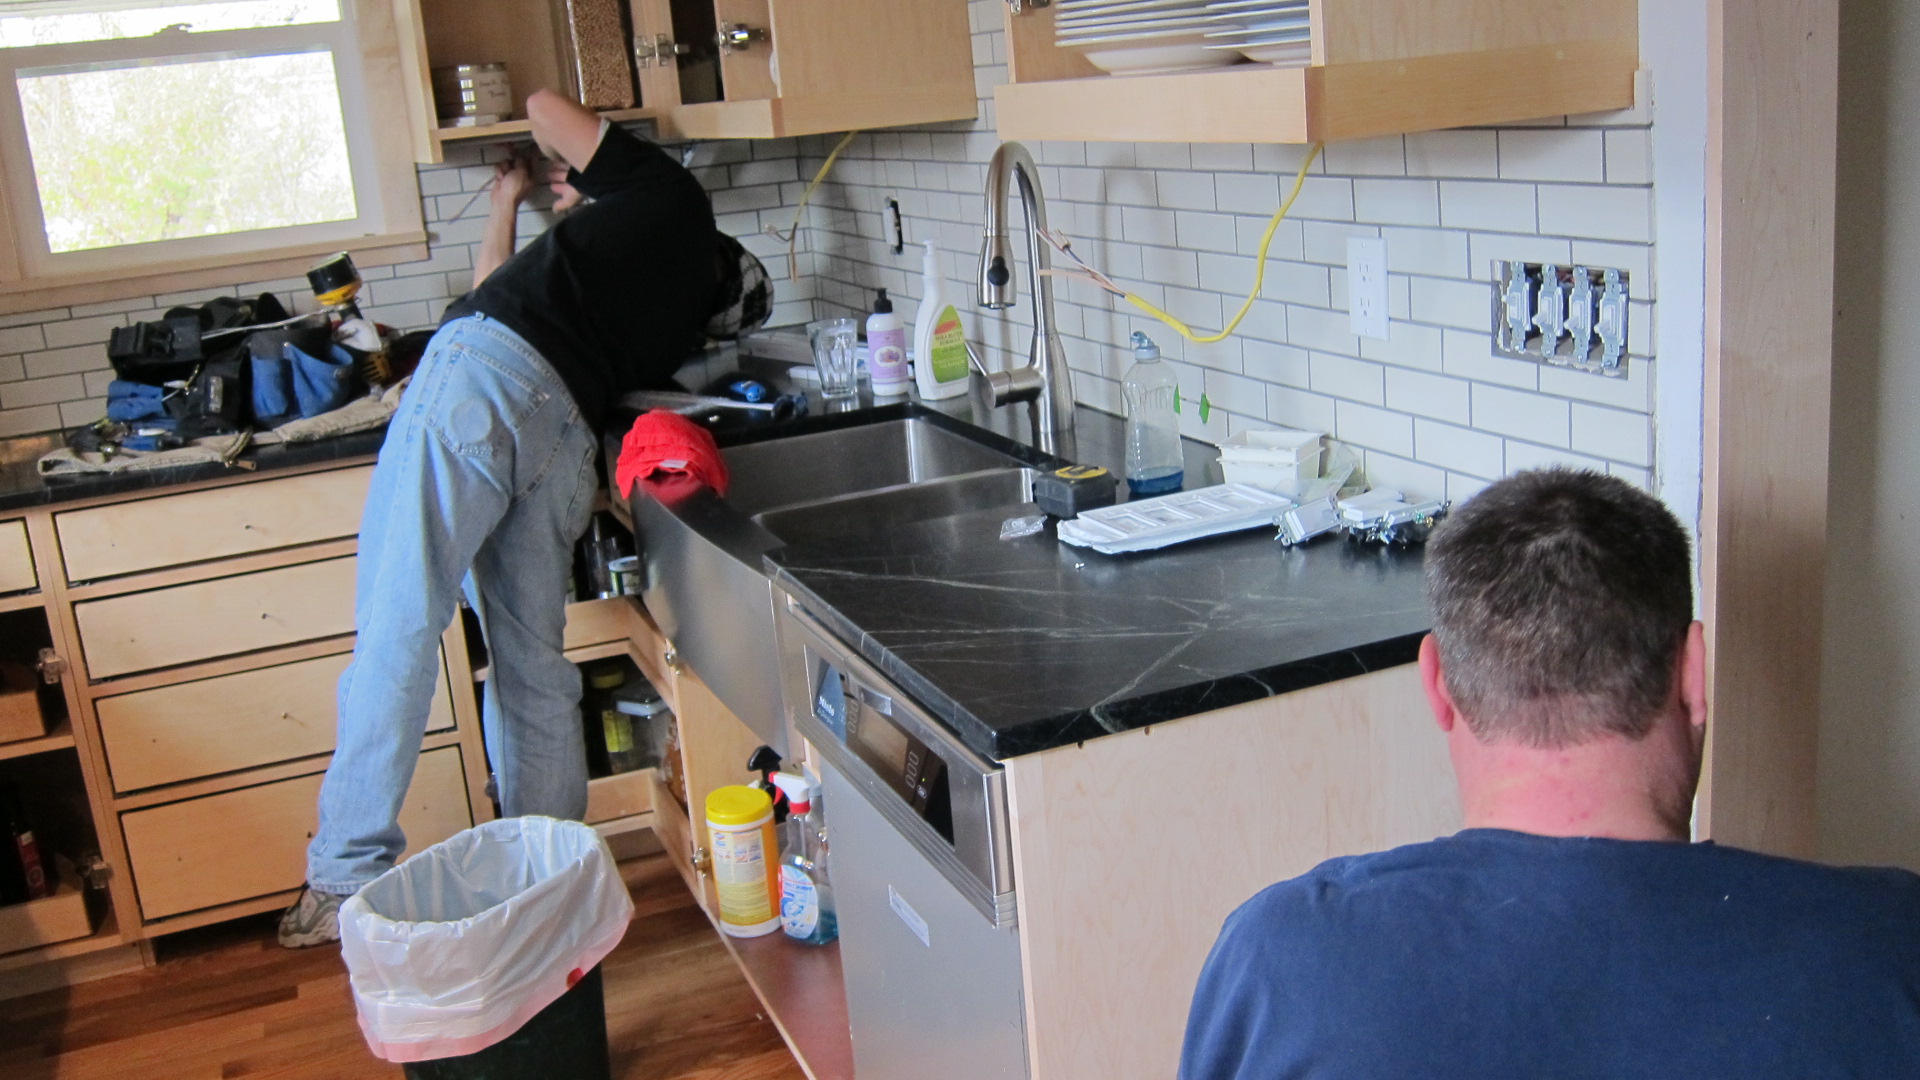 two men are doing work on a kitchen sink